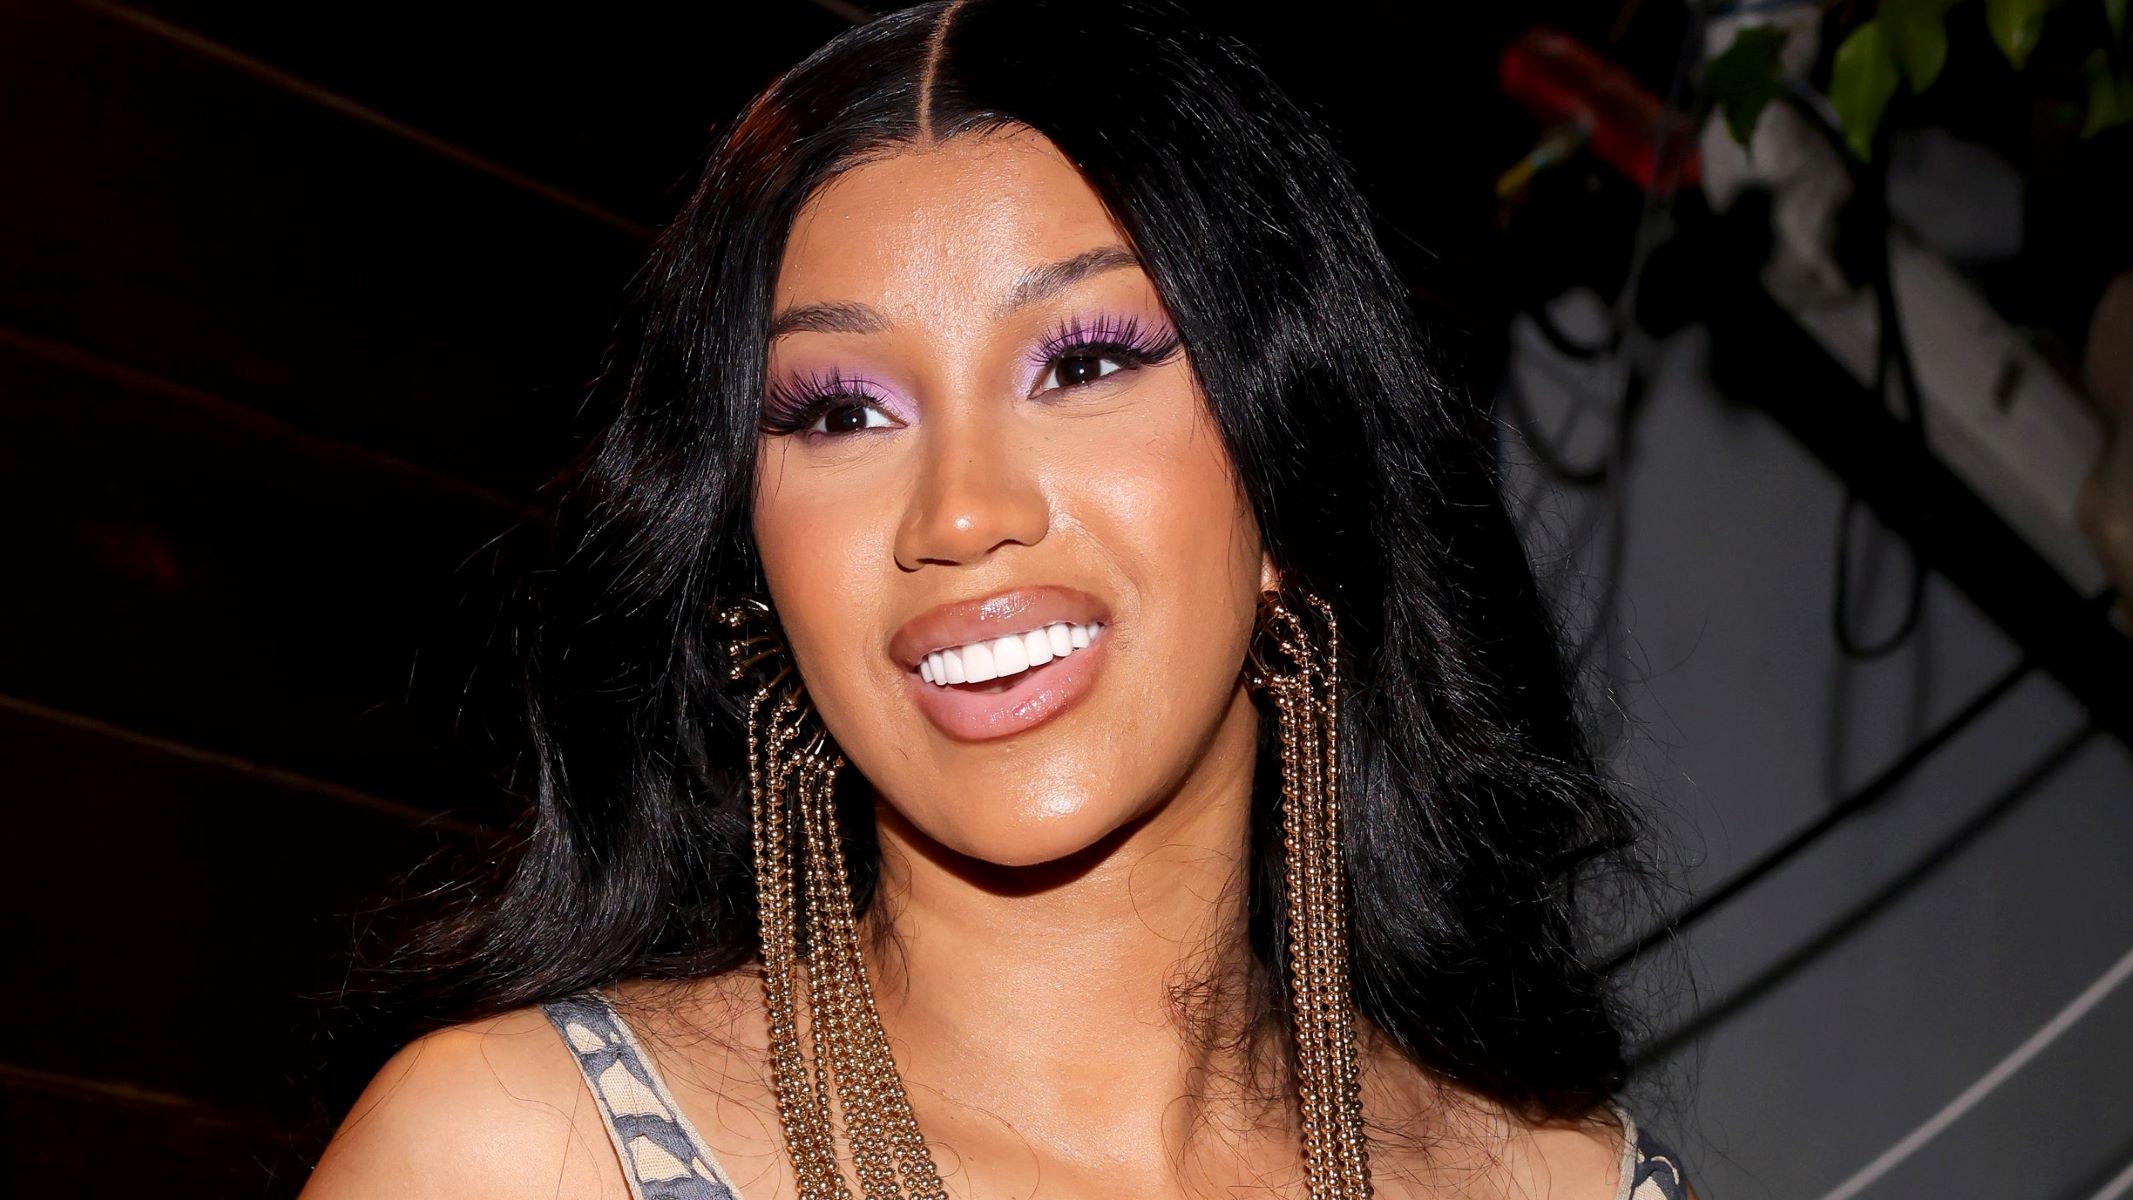 Cardi B Enjoys Offset’s 24-Hour Live Stream, Expresses Interest In Knowing His Every Move